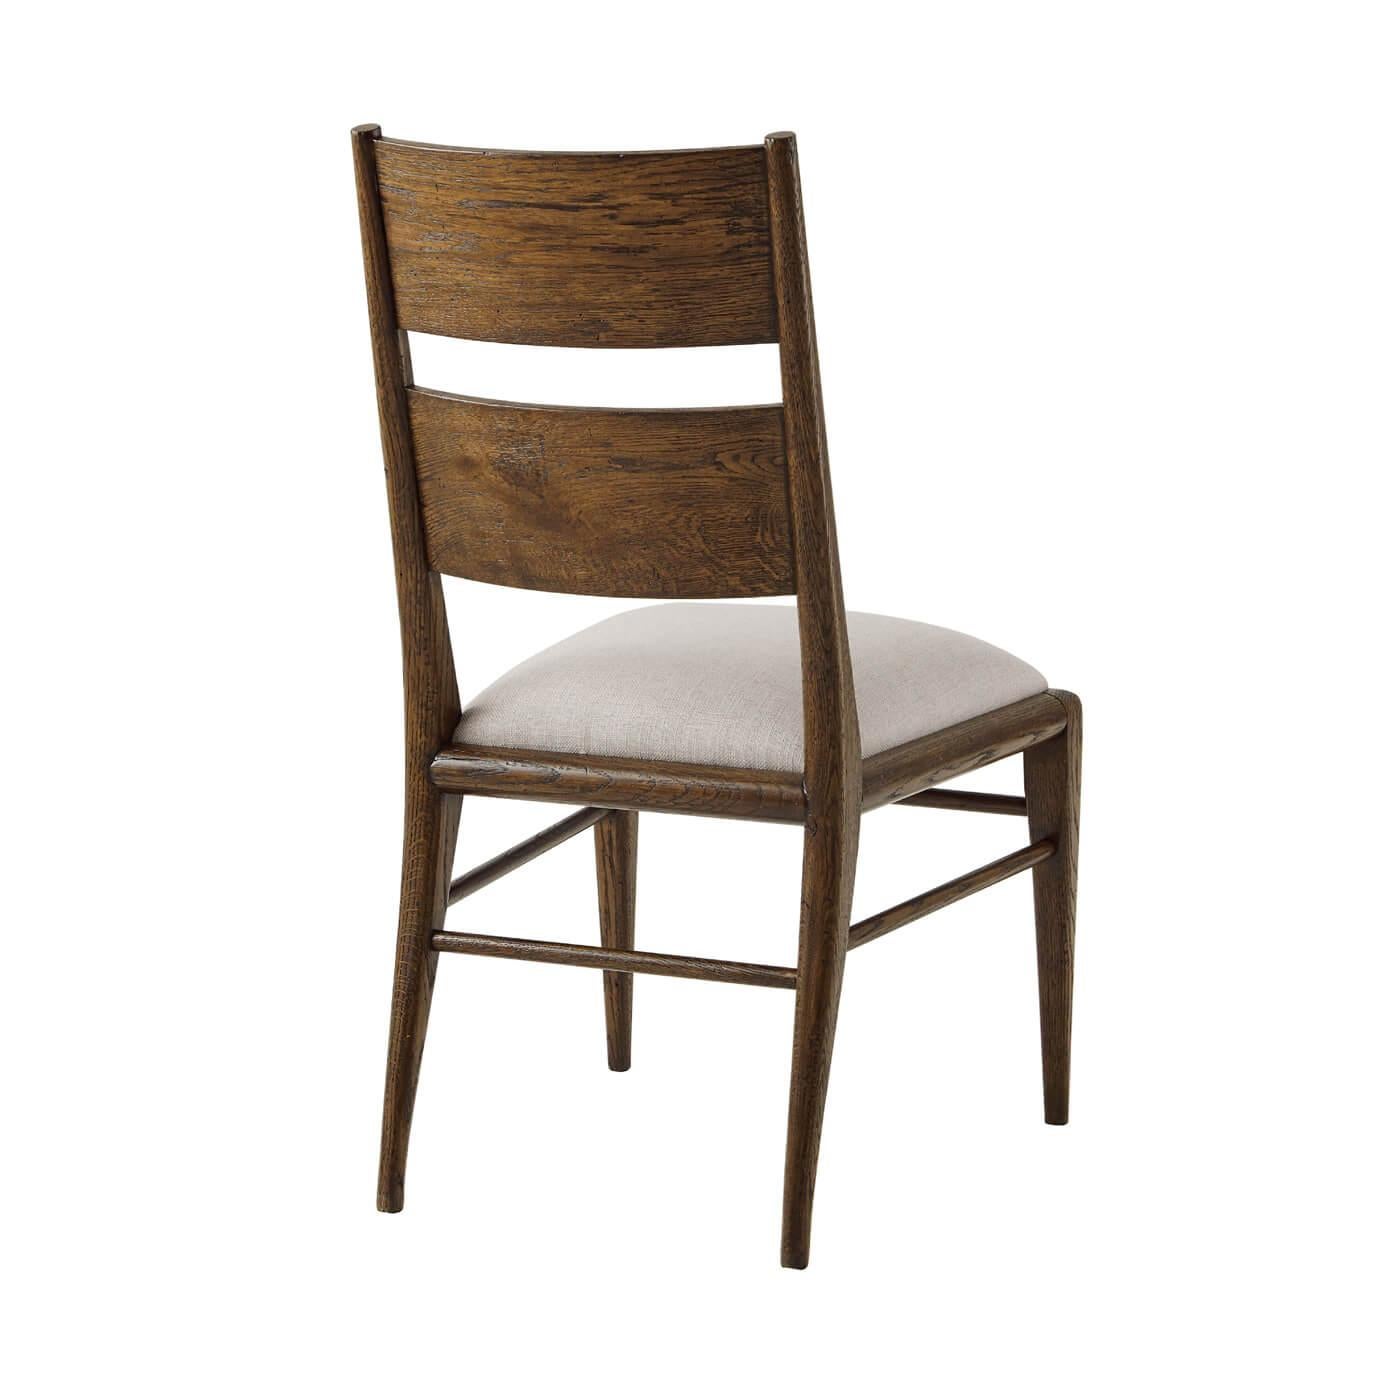 A dark oak parquetry dining chair with tapered oak legs. Its upholstered seat is constructed with a top and mid-rail bar joined by stretchers. 
Shown in Dusk Finish
Shown in Linen-UP5409 Fabric
Dimensions
19.5